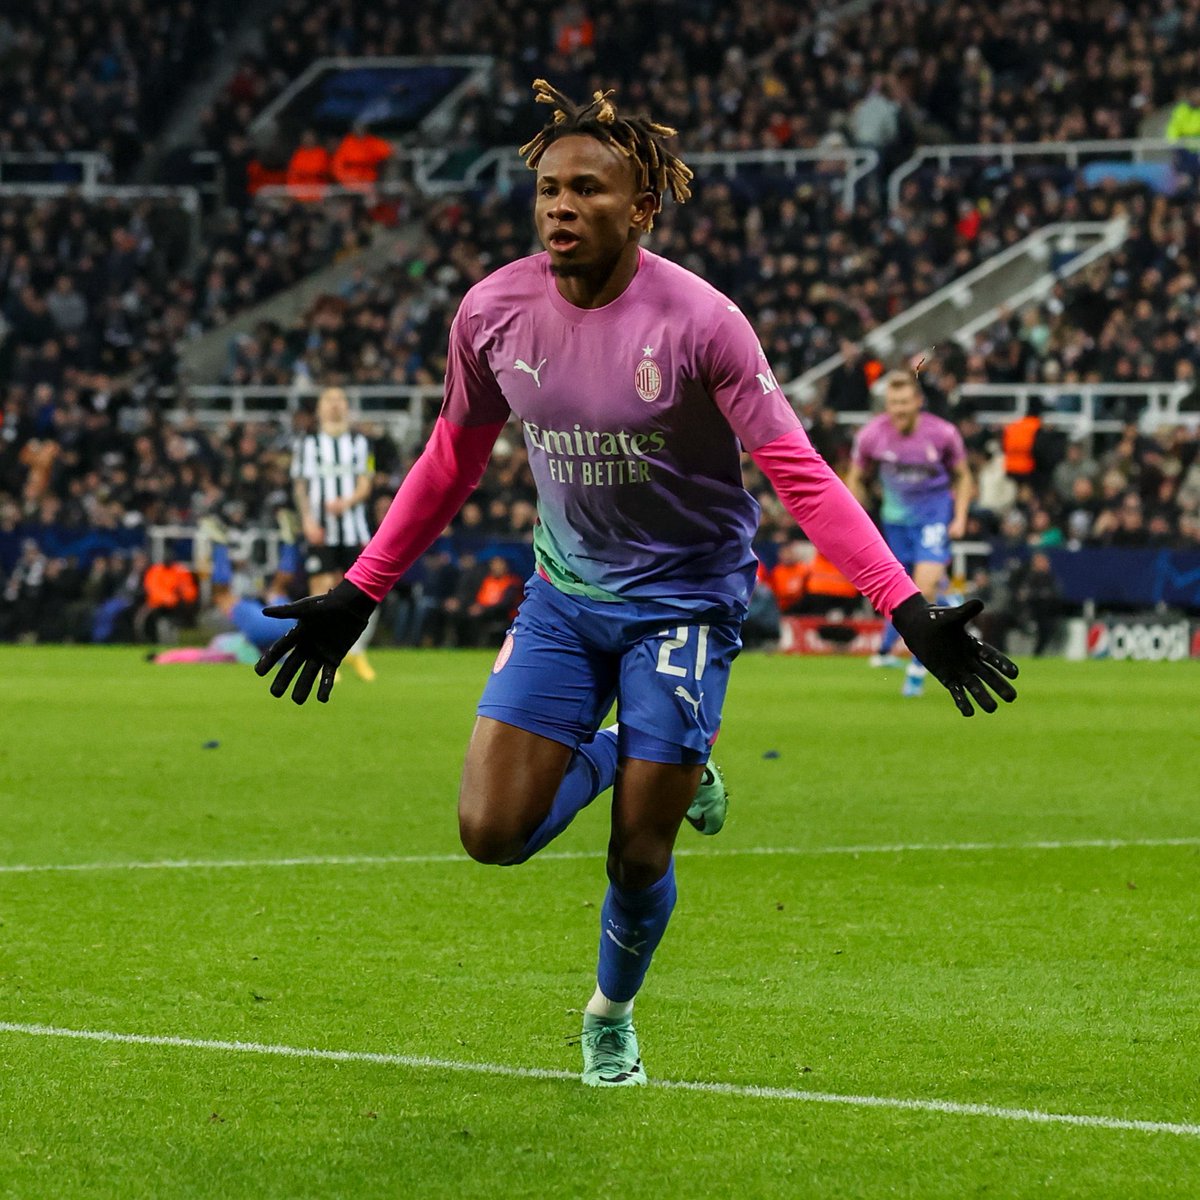 I am all about the downfall of Newcastle United! The fact that my Nigerian Brother gave them the last cut makes me happier! Chukwueze onye ball, Lerry’s babe would be so proud. #UCL